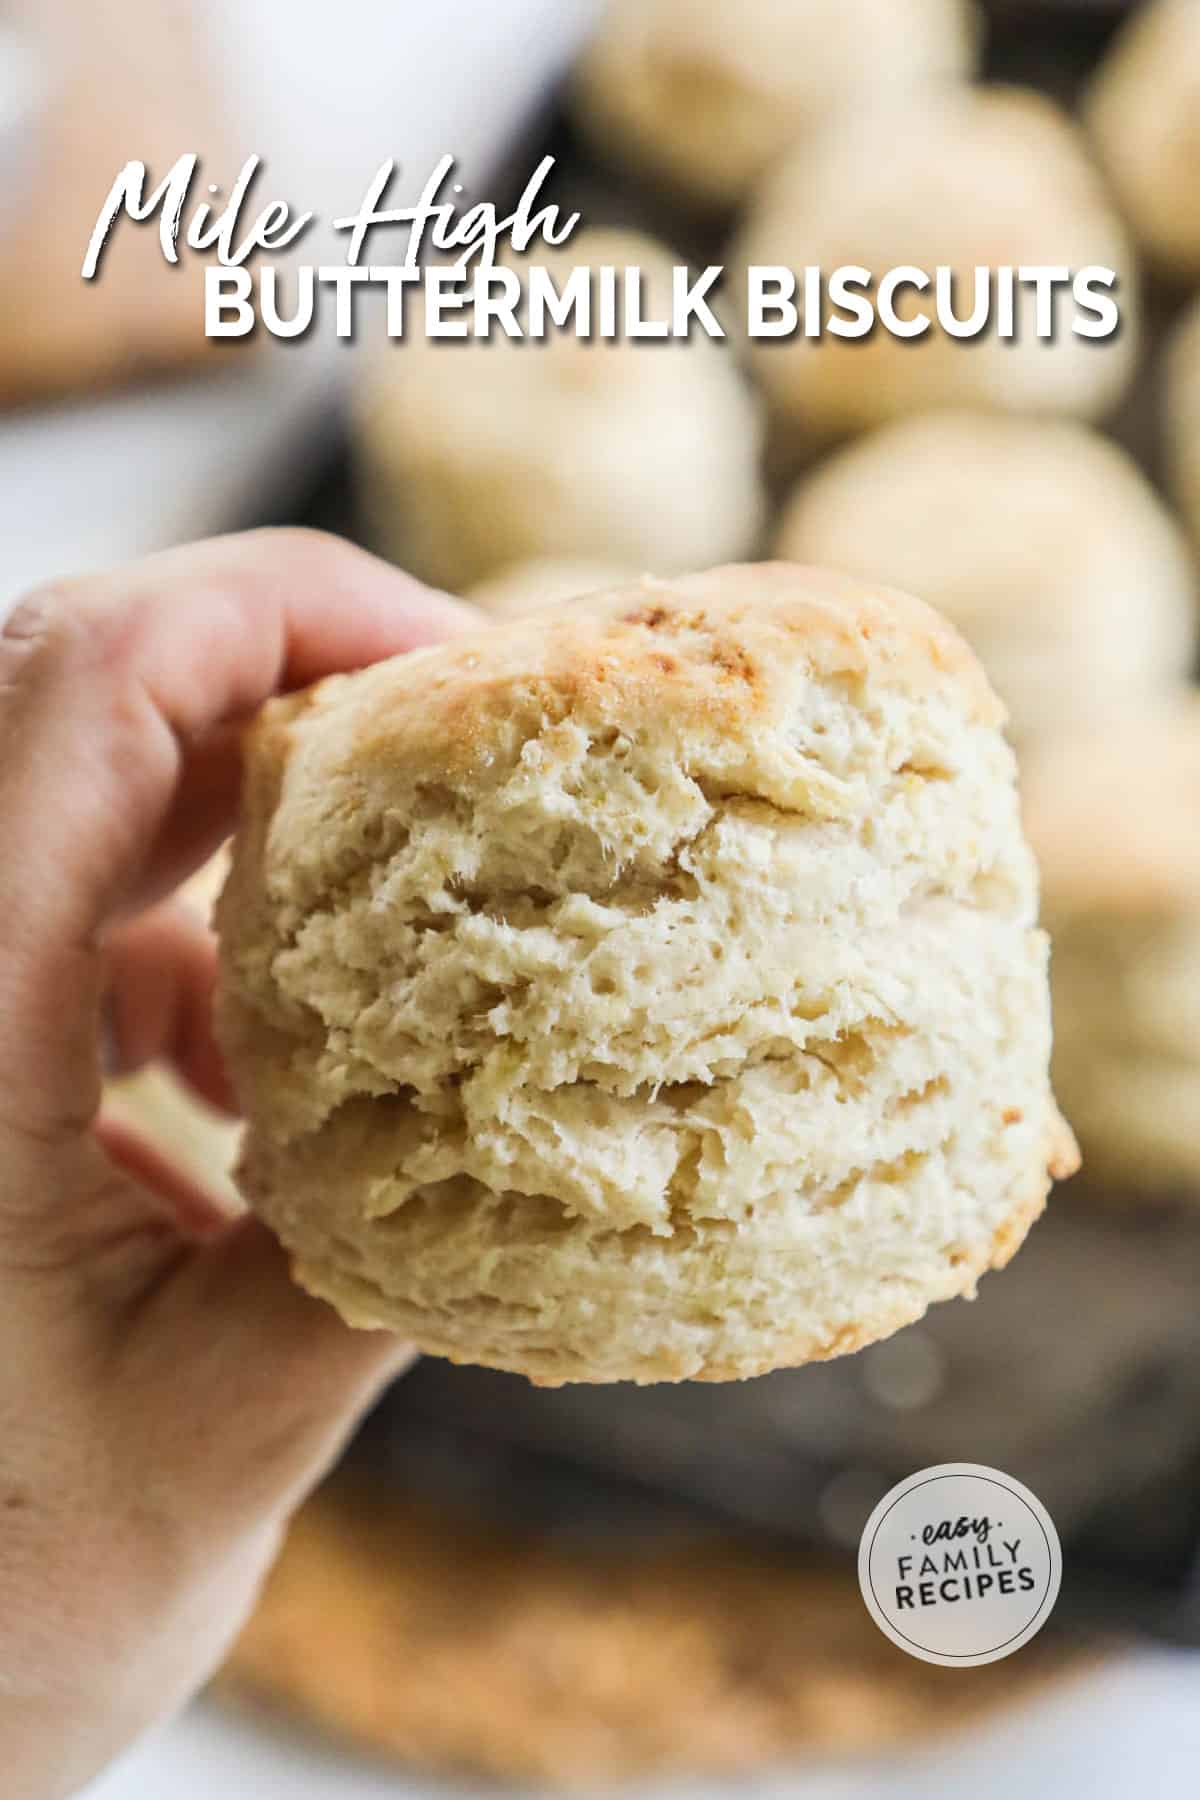 Hand holding a very tall and fluffy buttermilk biscuit close to show texture.